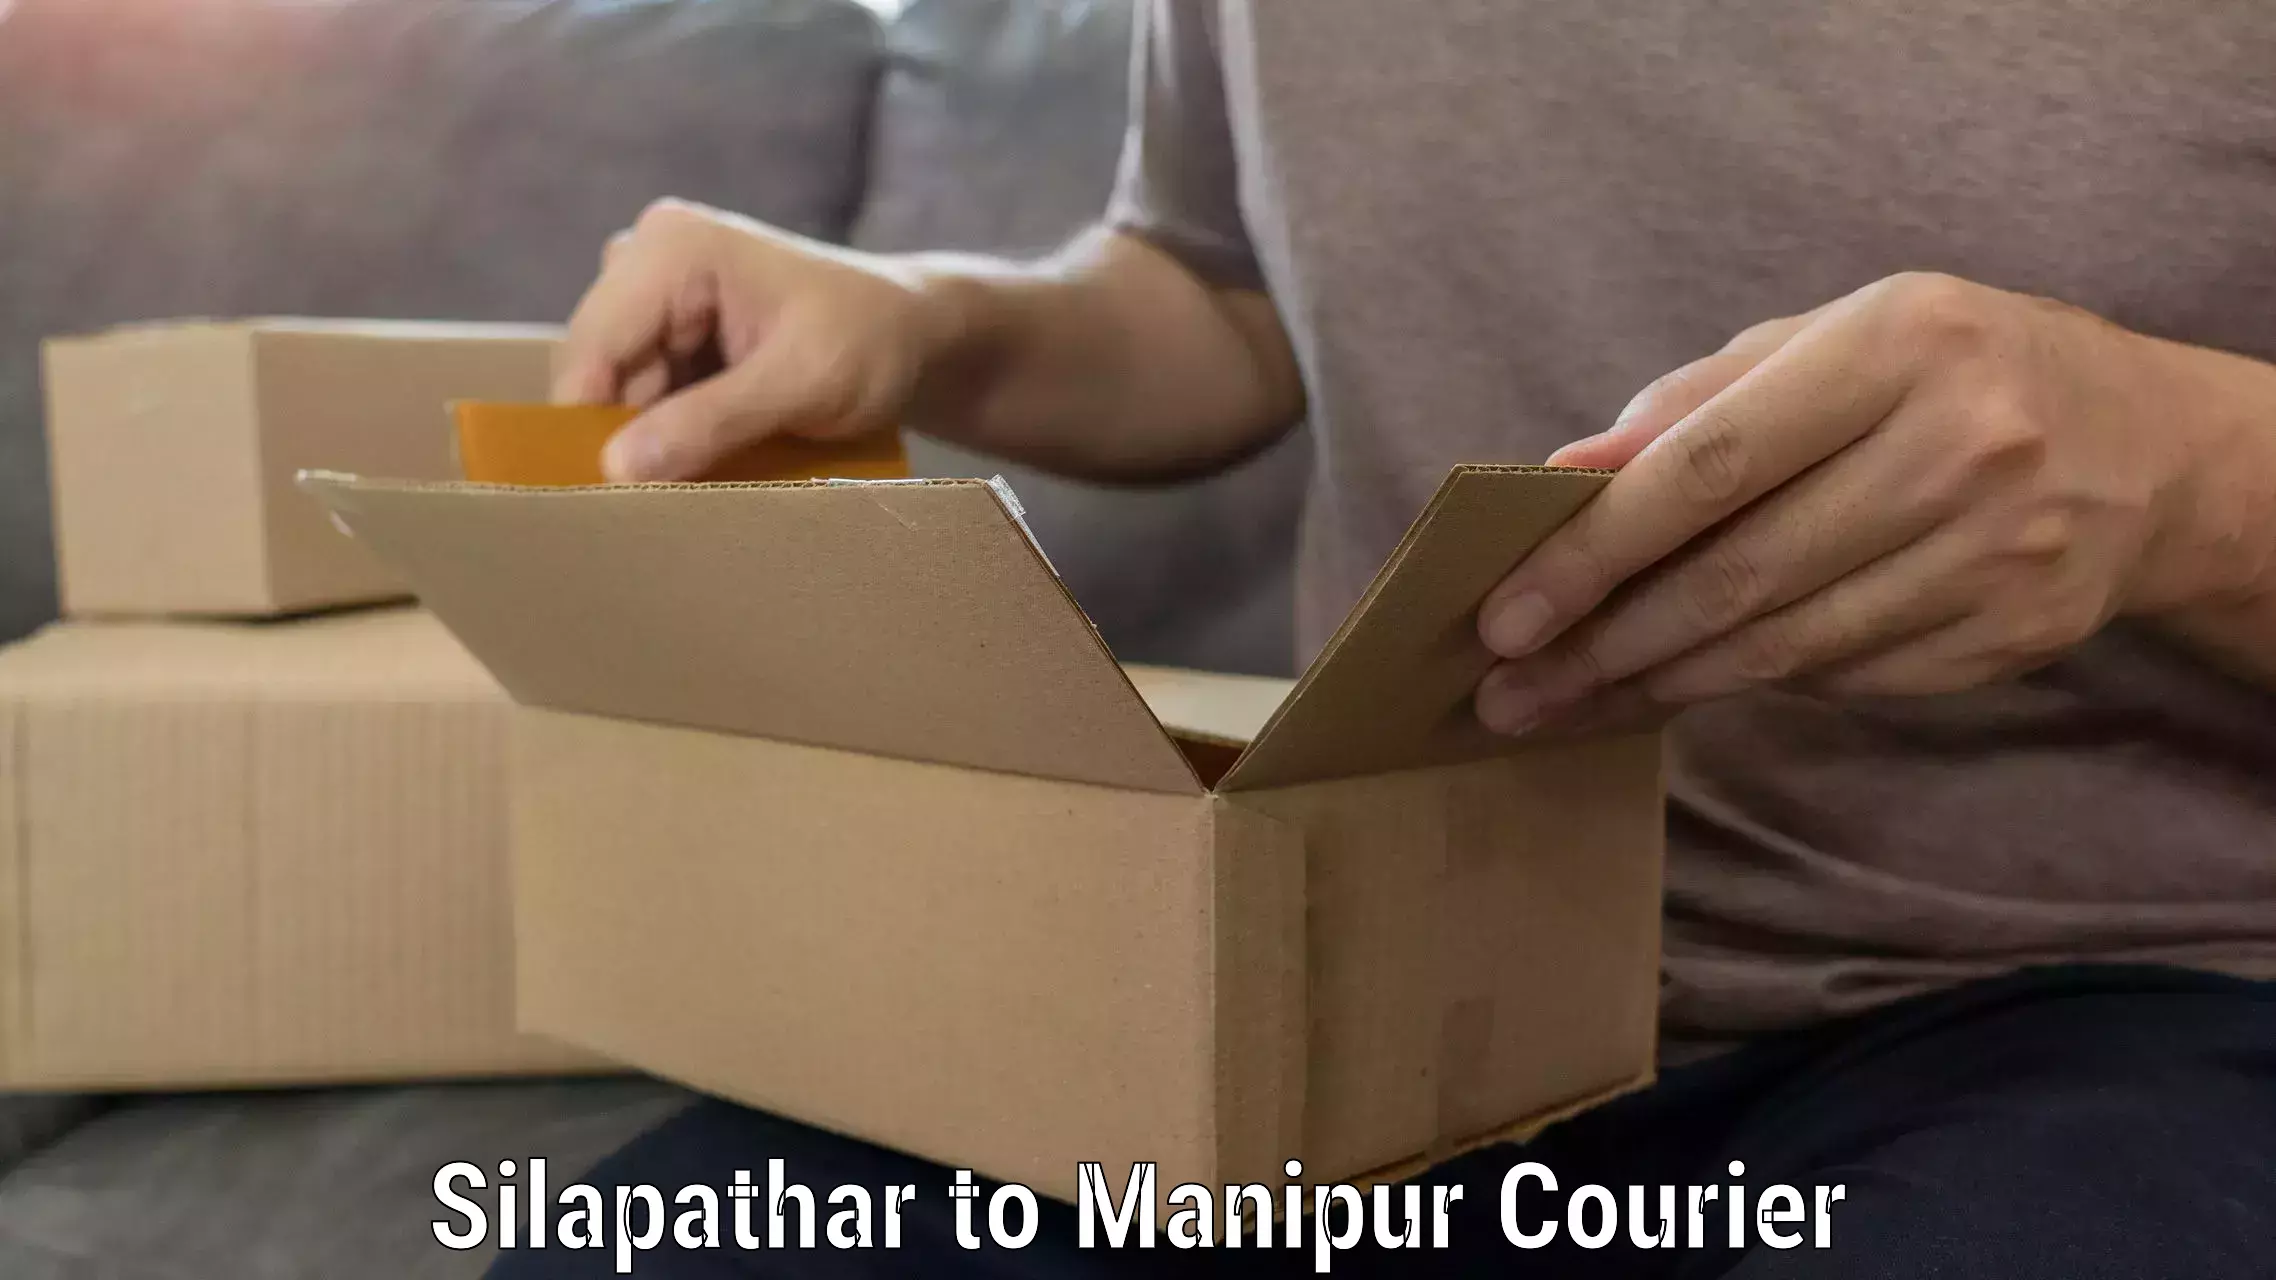 Furniture transport company Silapathar to Manipur